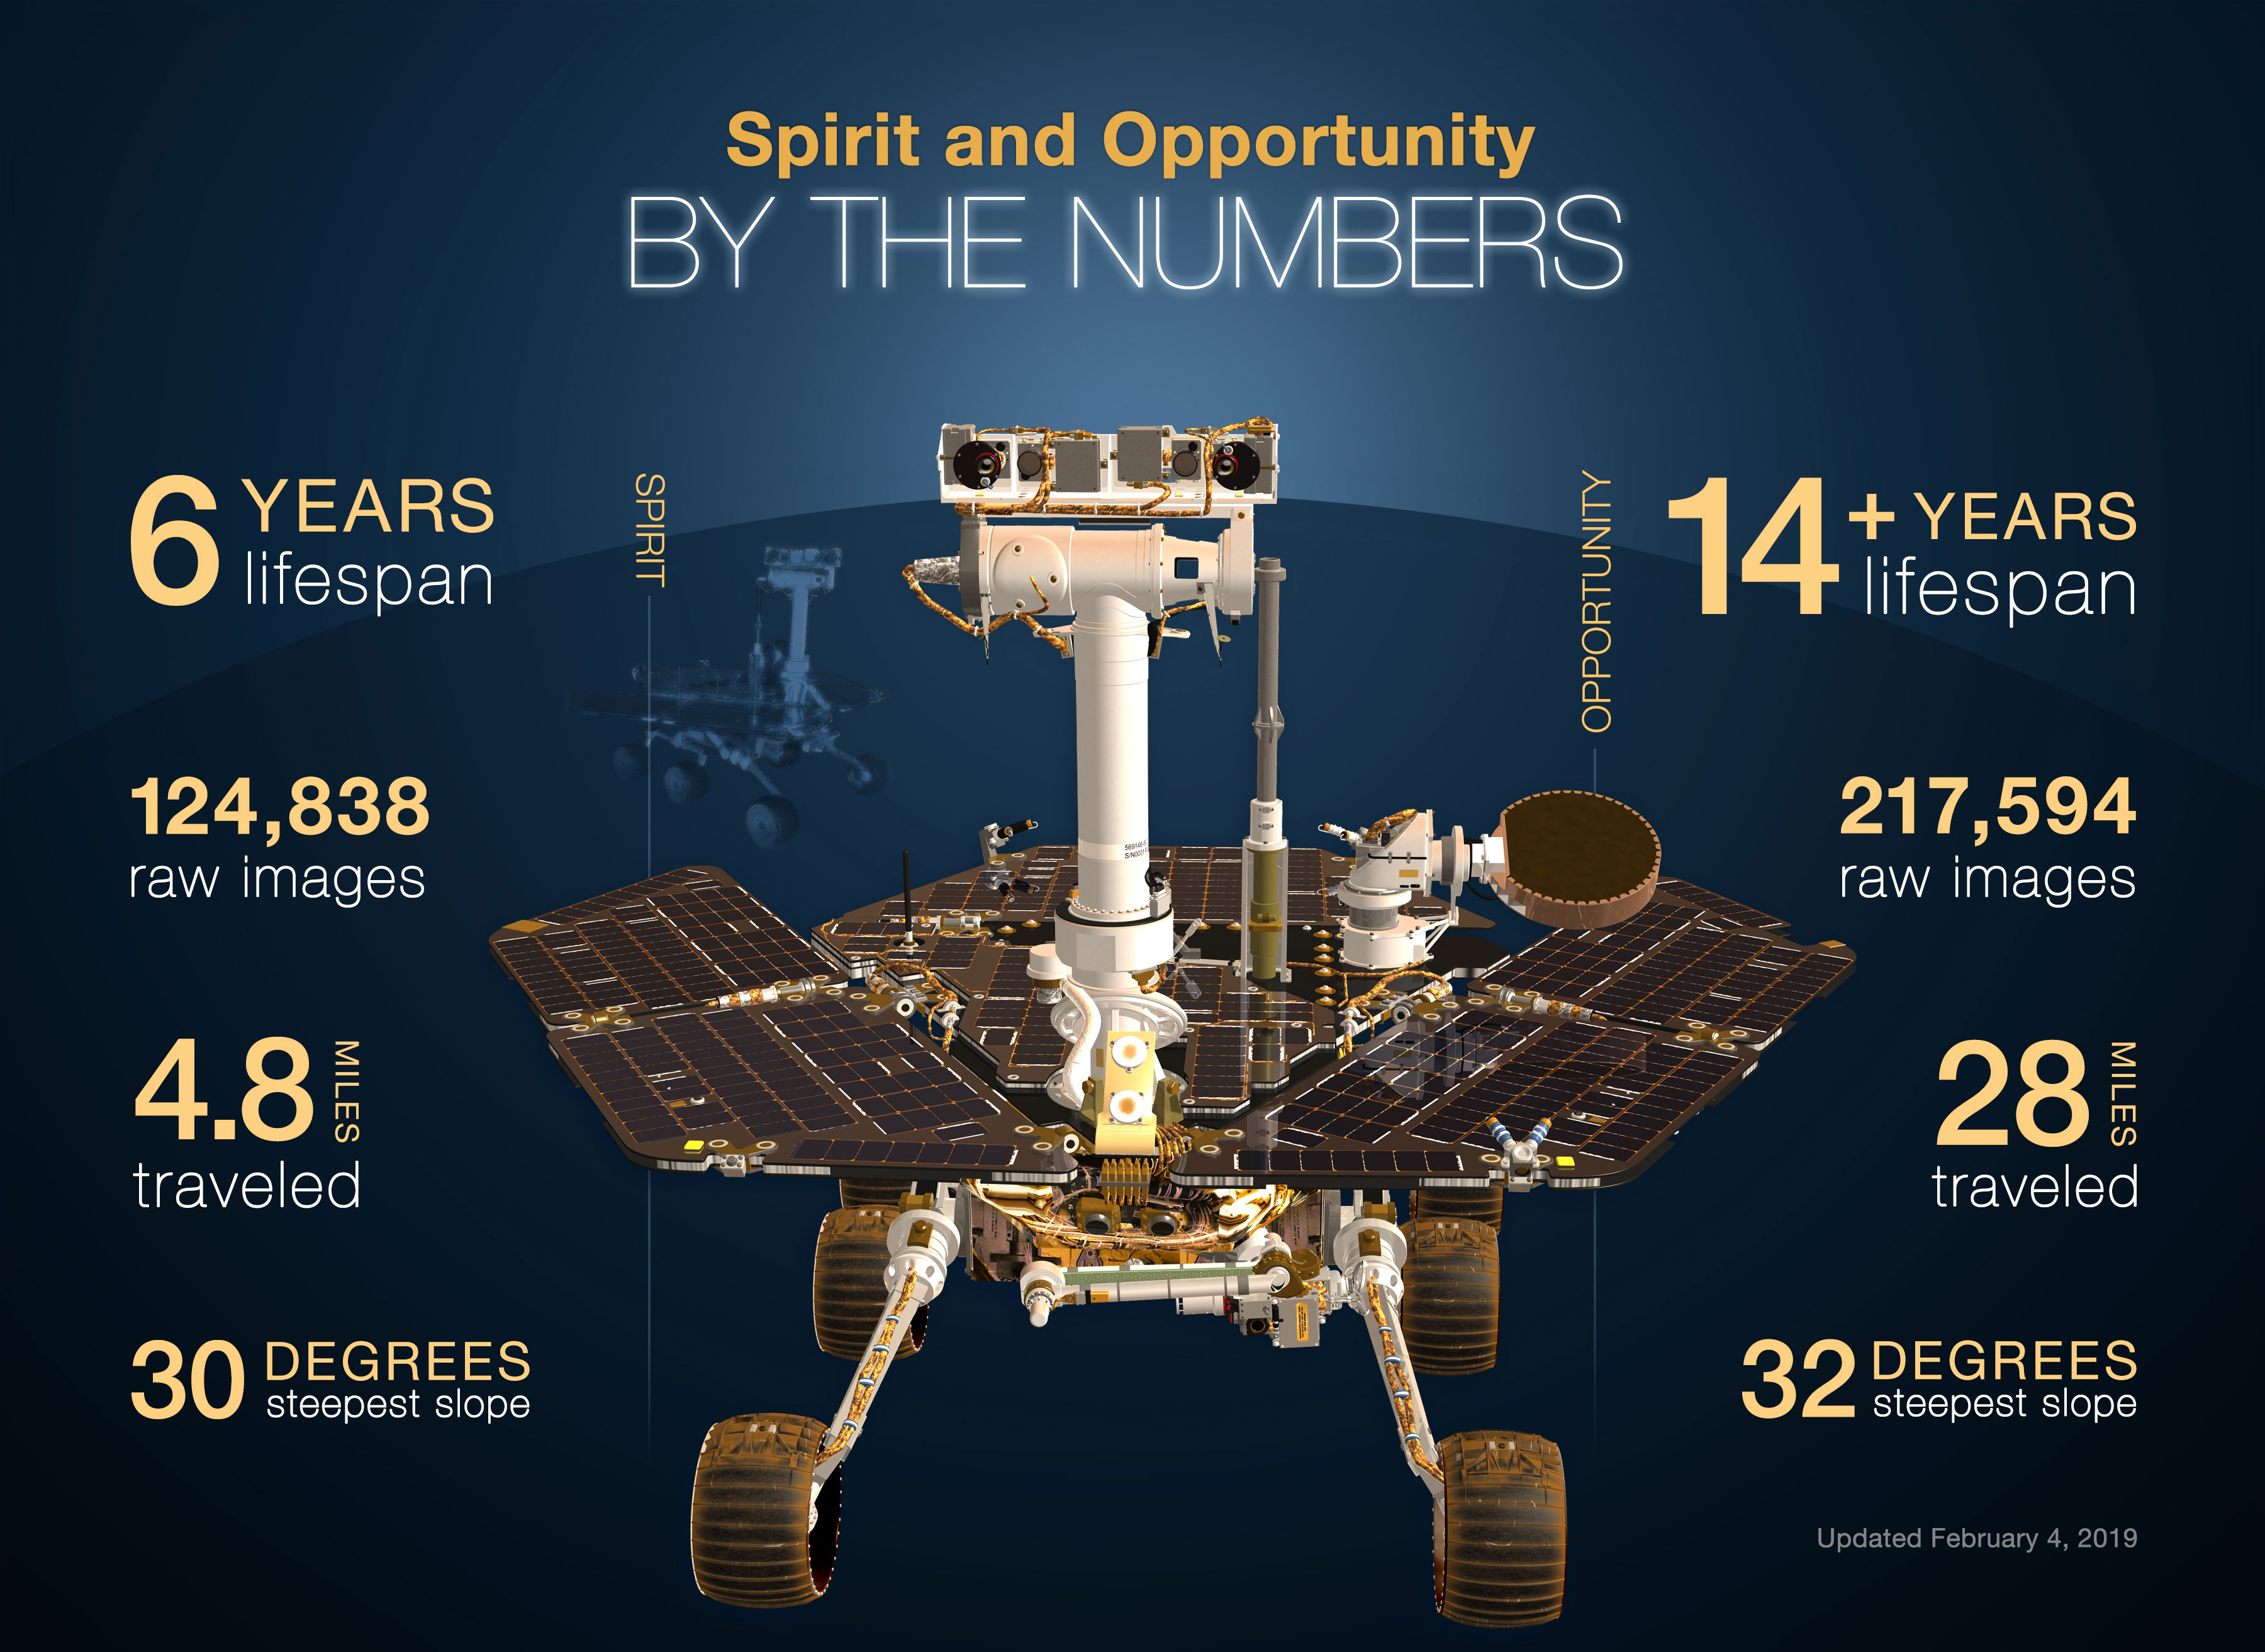 Graphic showing Opportunity's statistics.